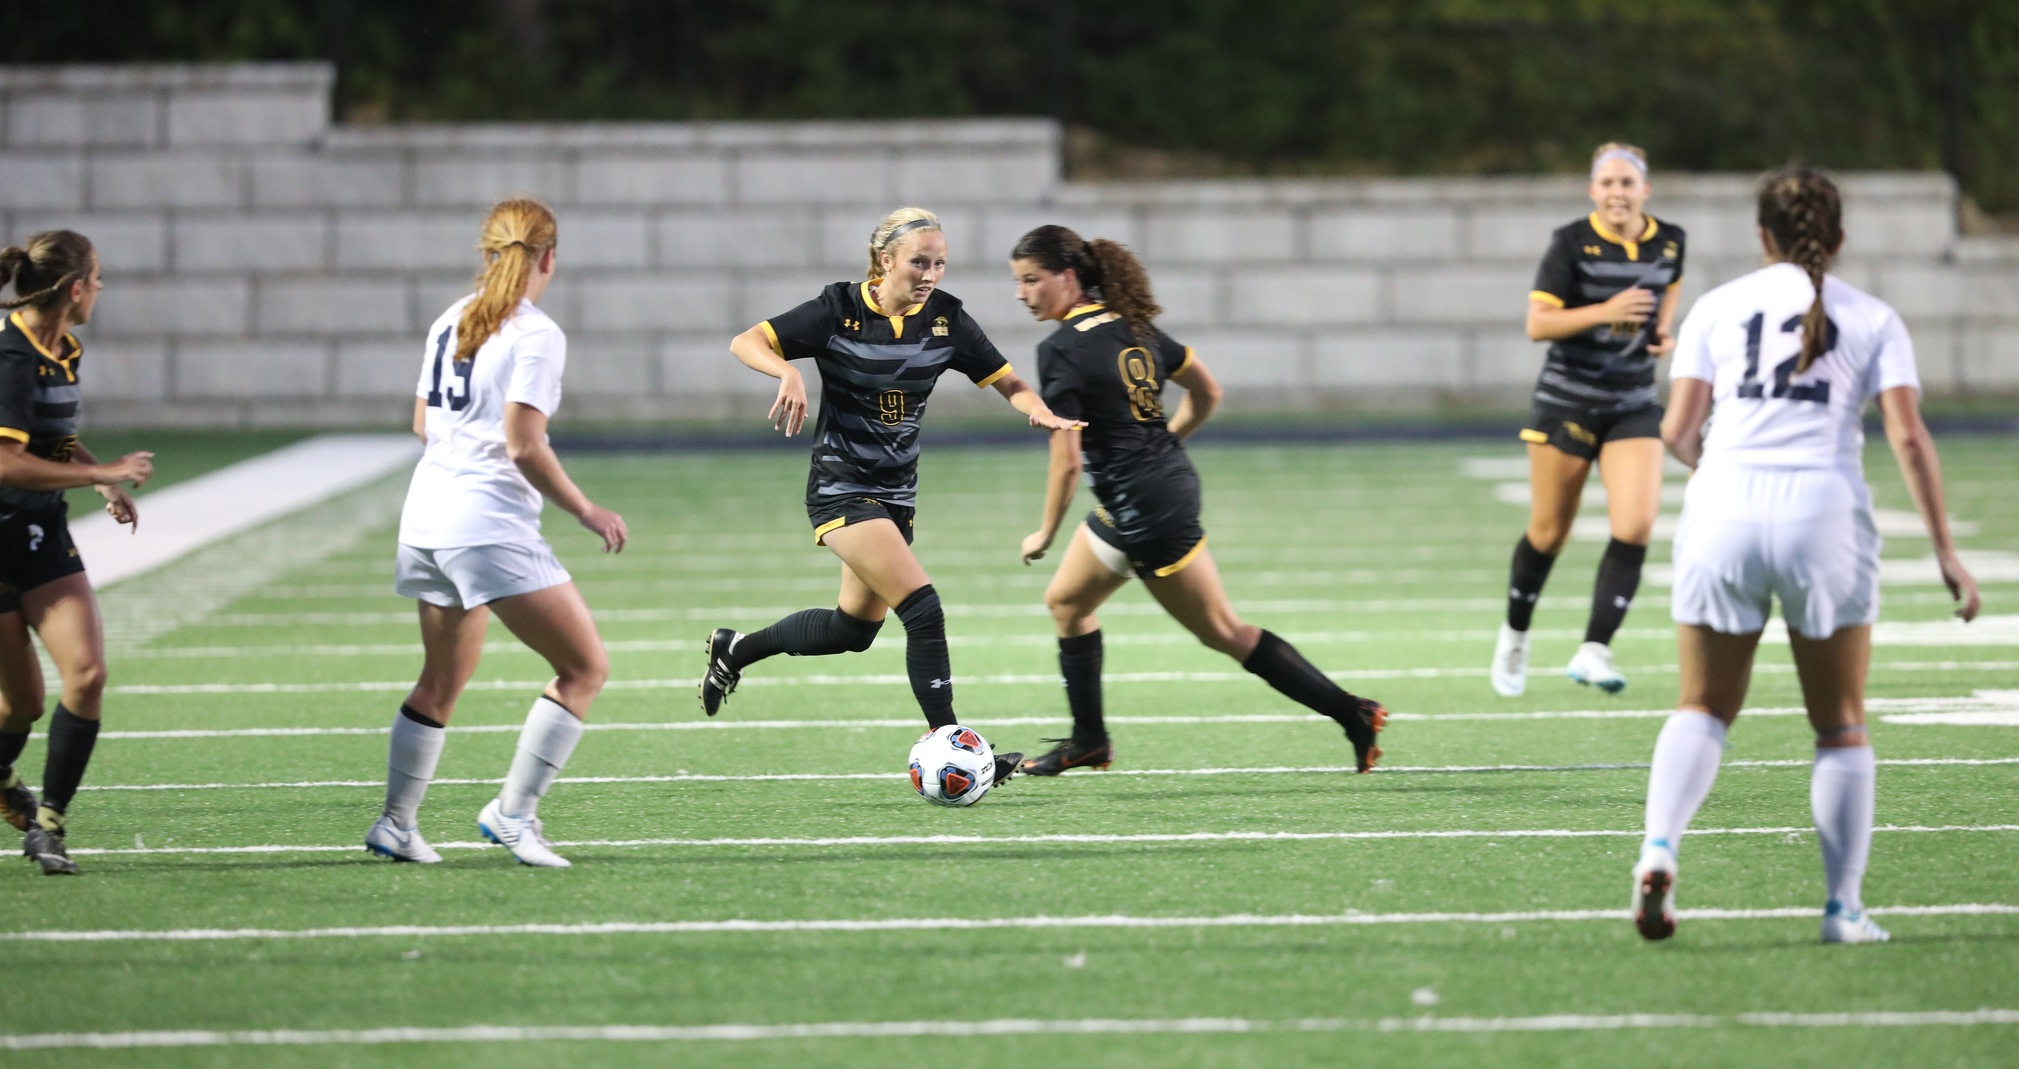 Alexis Brewer scored on one of her three shots to give UW-Oshkosh a 3-0 lead.